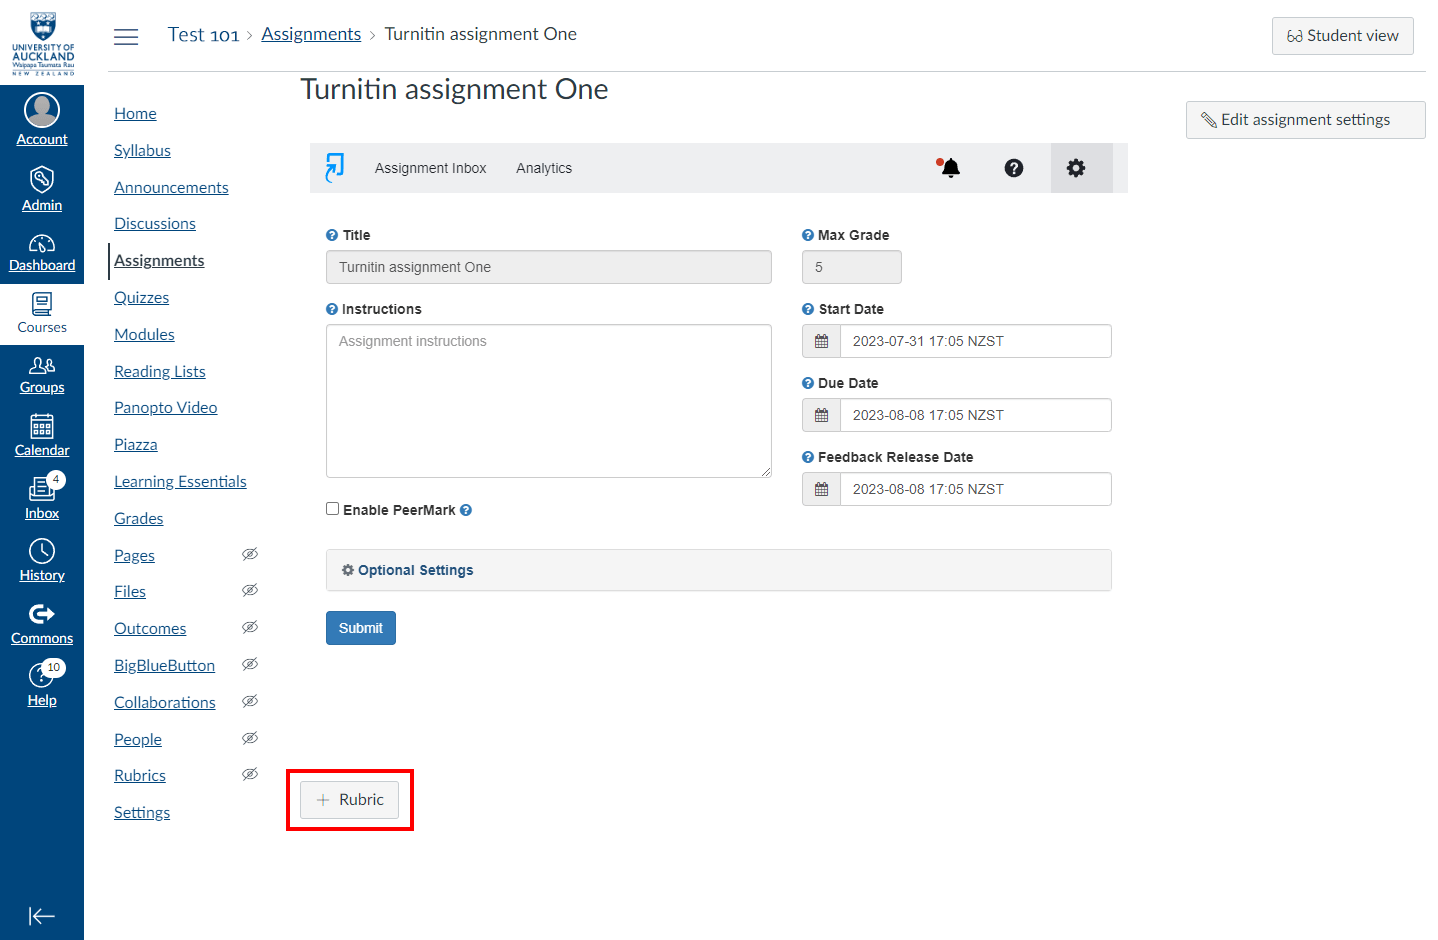 The 'add rubrics' button is external to the assignment settings. When you have added the assignment, ensure you scroll right to the bottom of your page to see the +RUBRIC button at the bottom.